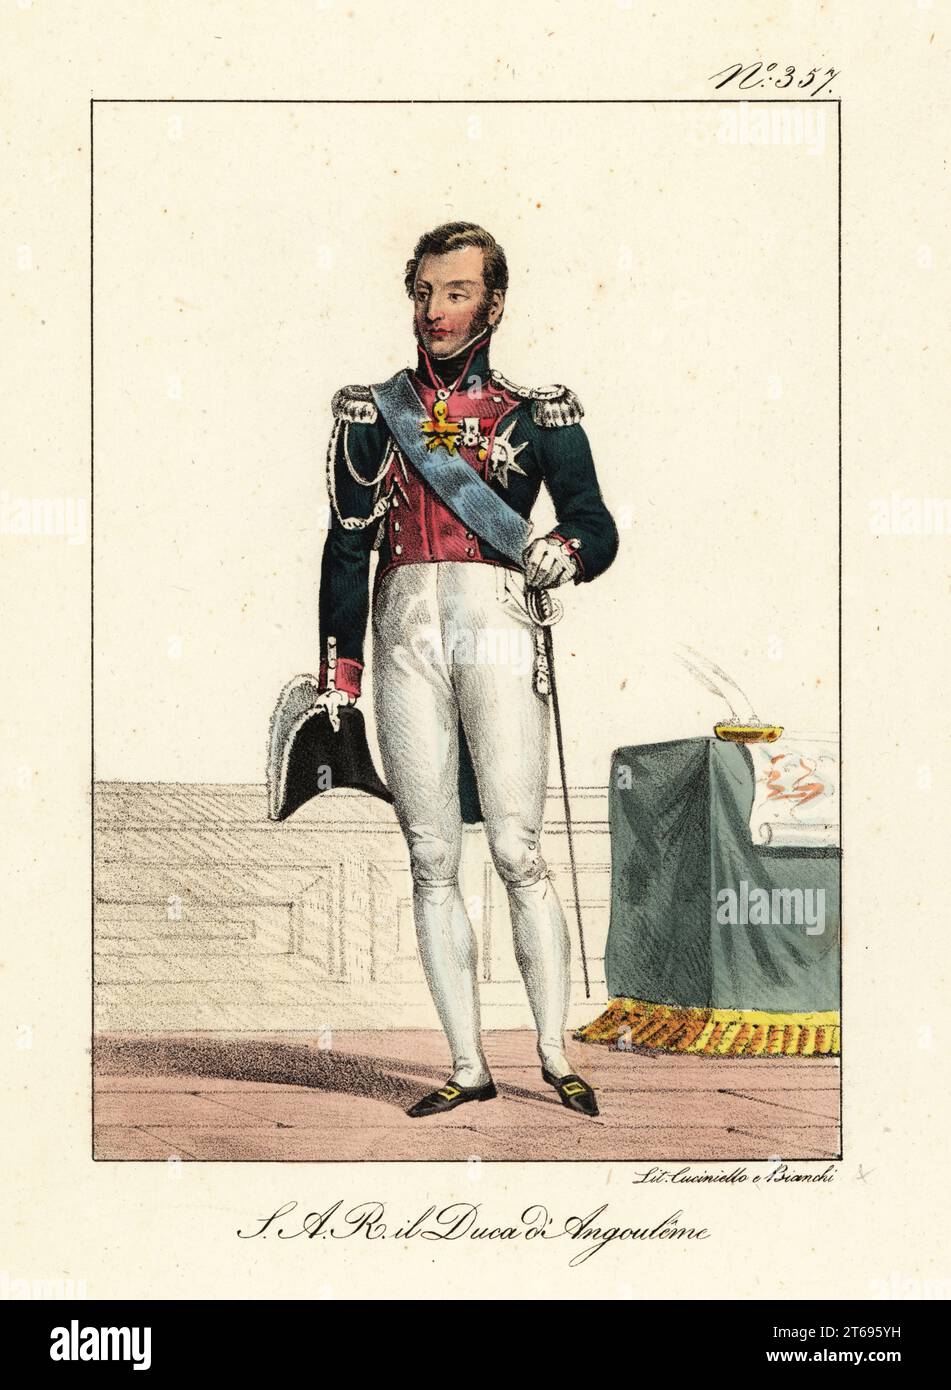 Louis Antoine of France, Duke of Angoulême (1775-1844), elder son of King Charles X of France, last Dauphin of France. With bicorne and court sword in military uniform. S.A.R. Monseigneur le Duc d'Angouleme. Handcoloured lithograph by Lorenzo Bianchi and Domenico Cuciniello after Hippolyte Lecomte from Costumi civili e militari della monarchia francese dal 1200 al 1820, Naples, 1825. Italian edition of Lecomtes Civilian and military costumes of the French monarchy from 1200 to 1820. Stock Photo